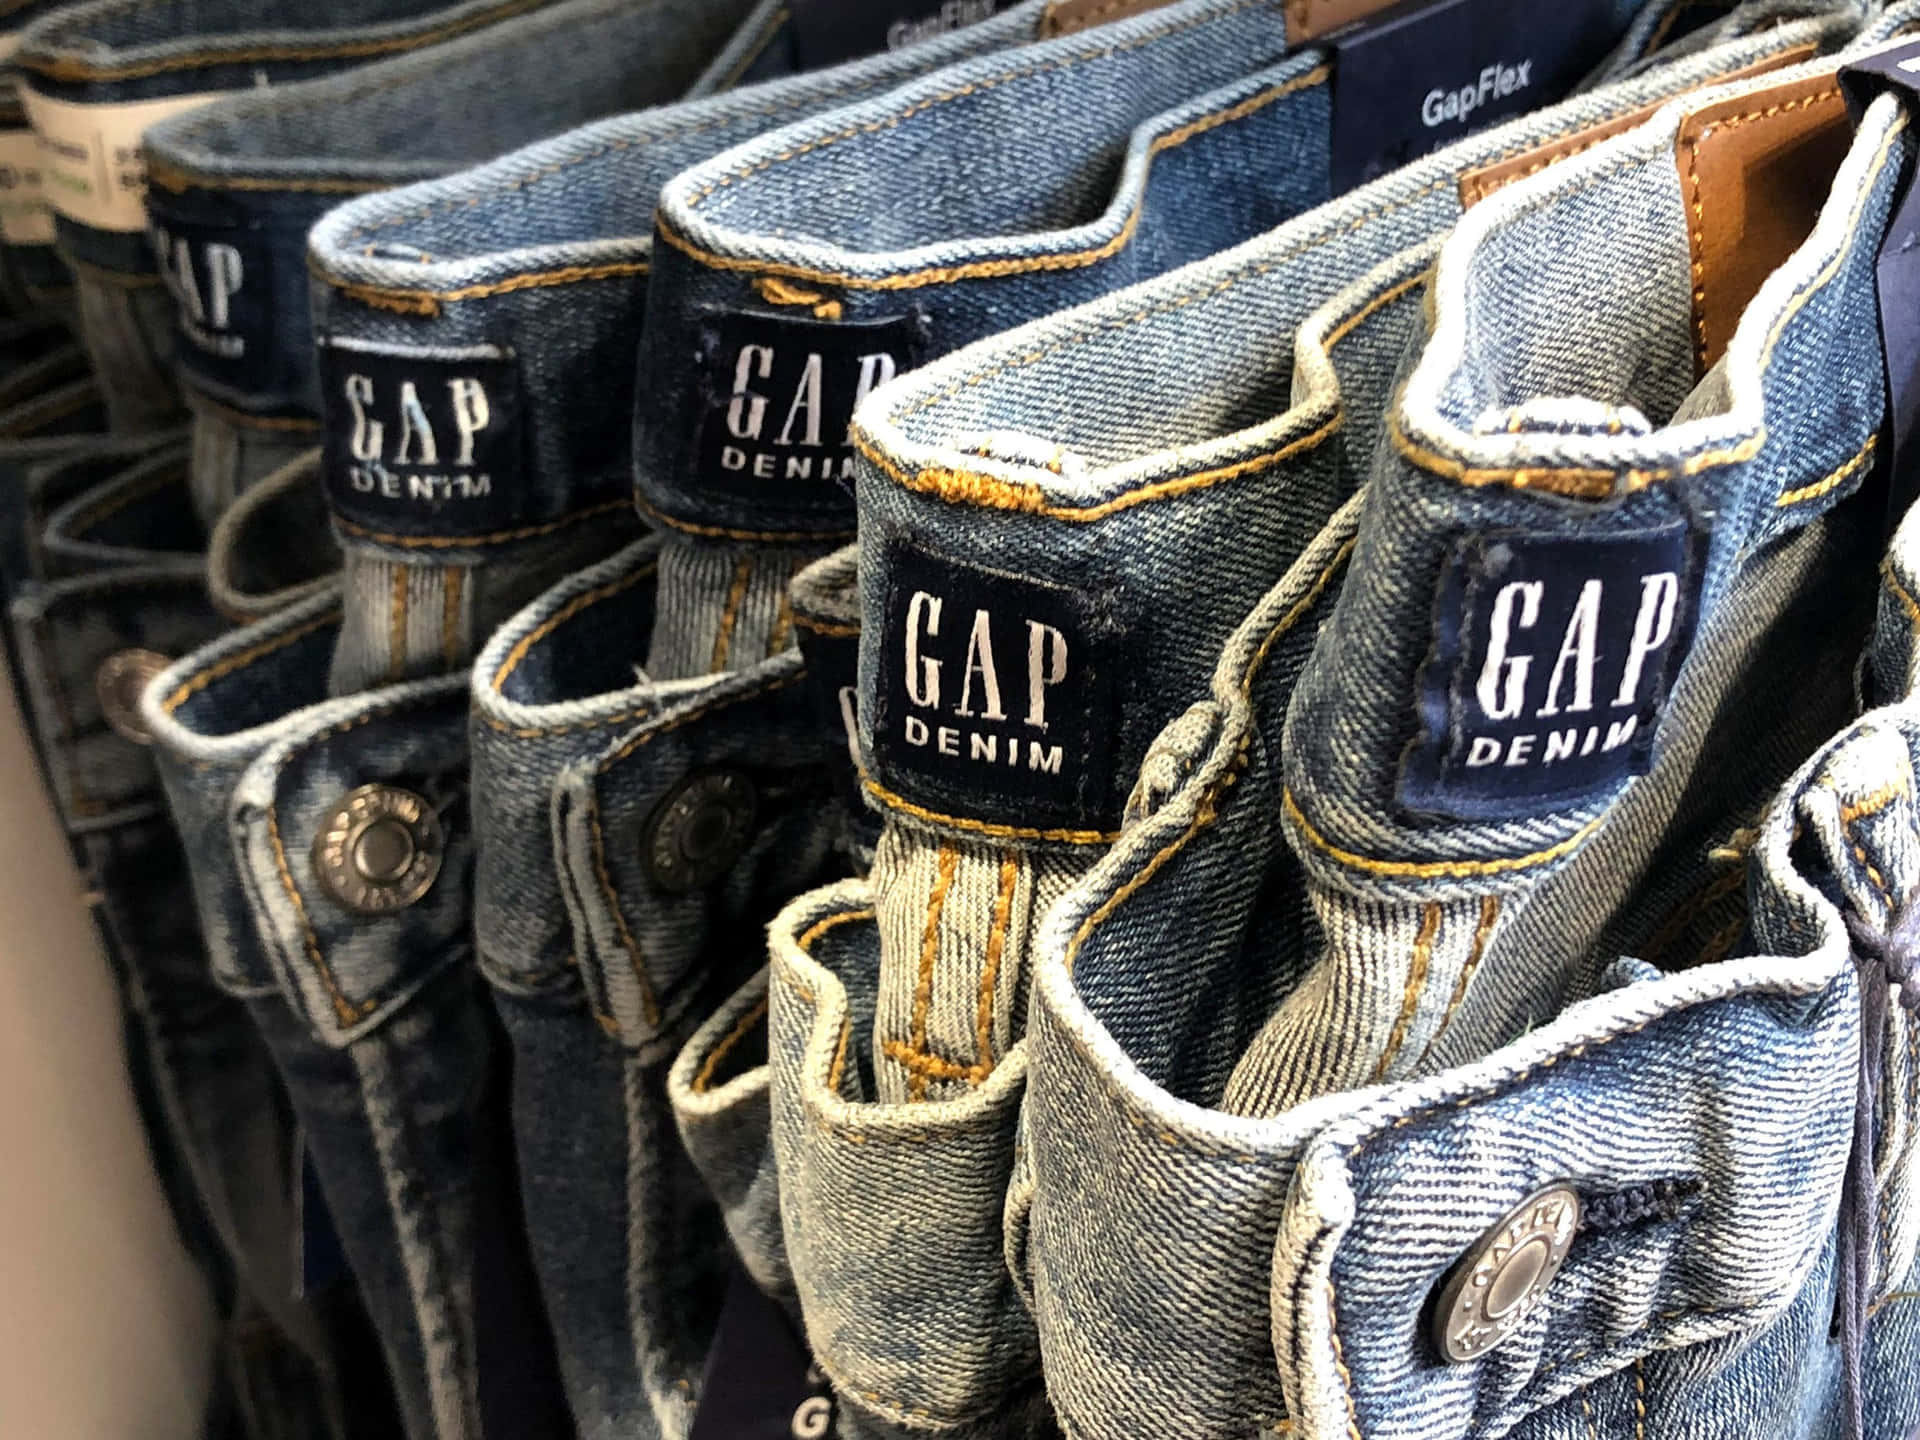 "Find your perfect fit with Gap"